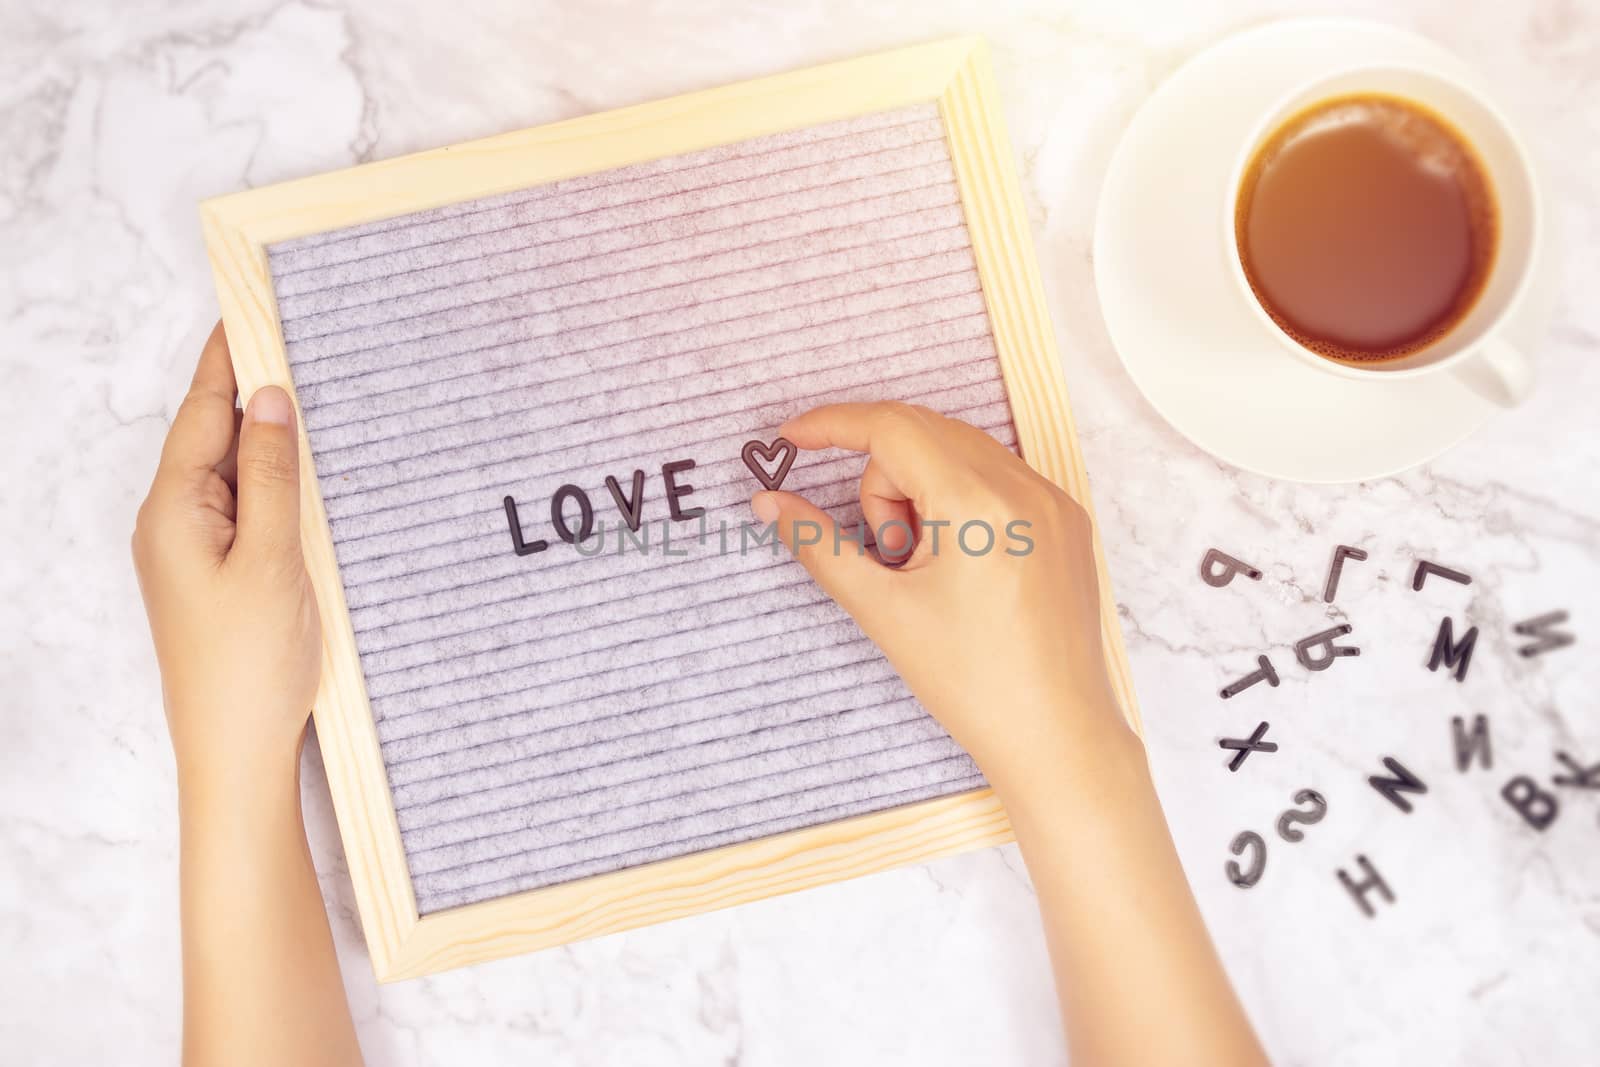 word LOVE on letter board with woman's hand holding heart symbol on white marble desk background with coffee cup